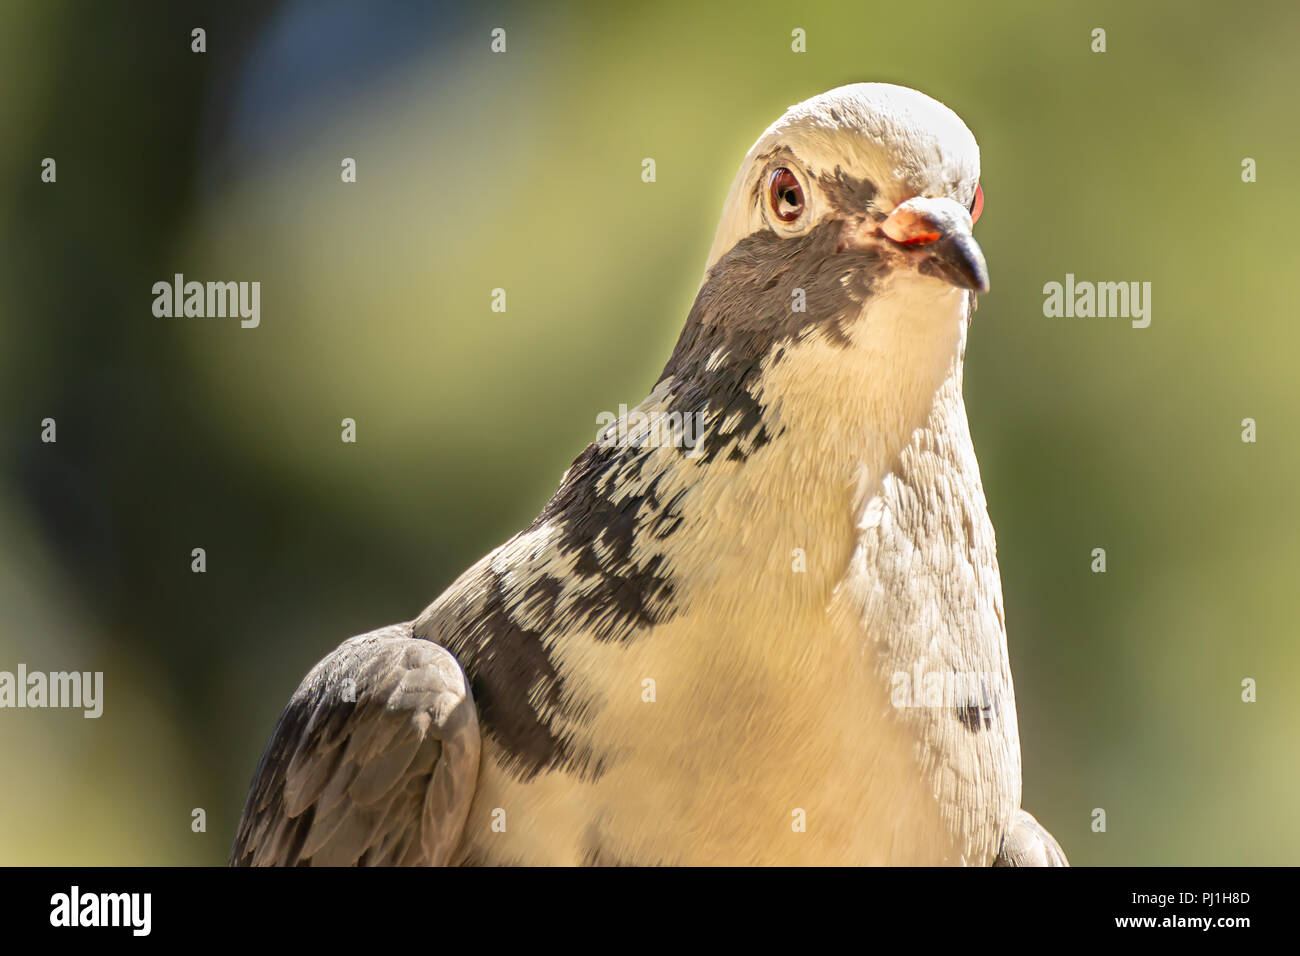 Domestic pigeon is a pigeon subspecies that was derived from the rock dove also called the rock pigeon. Columba livia domestica Stock Photo